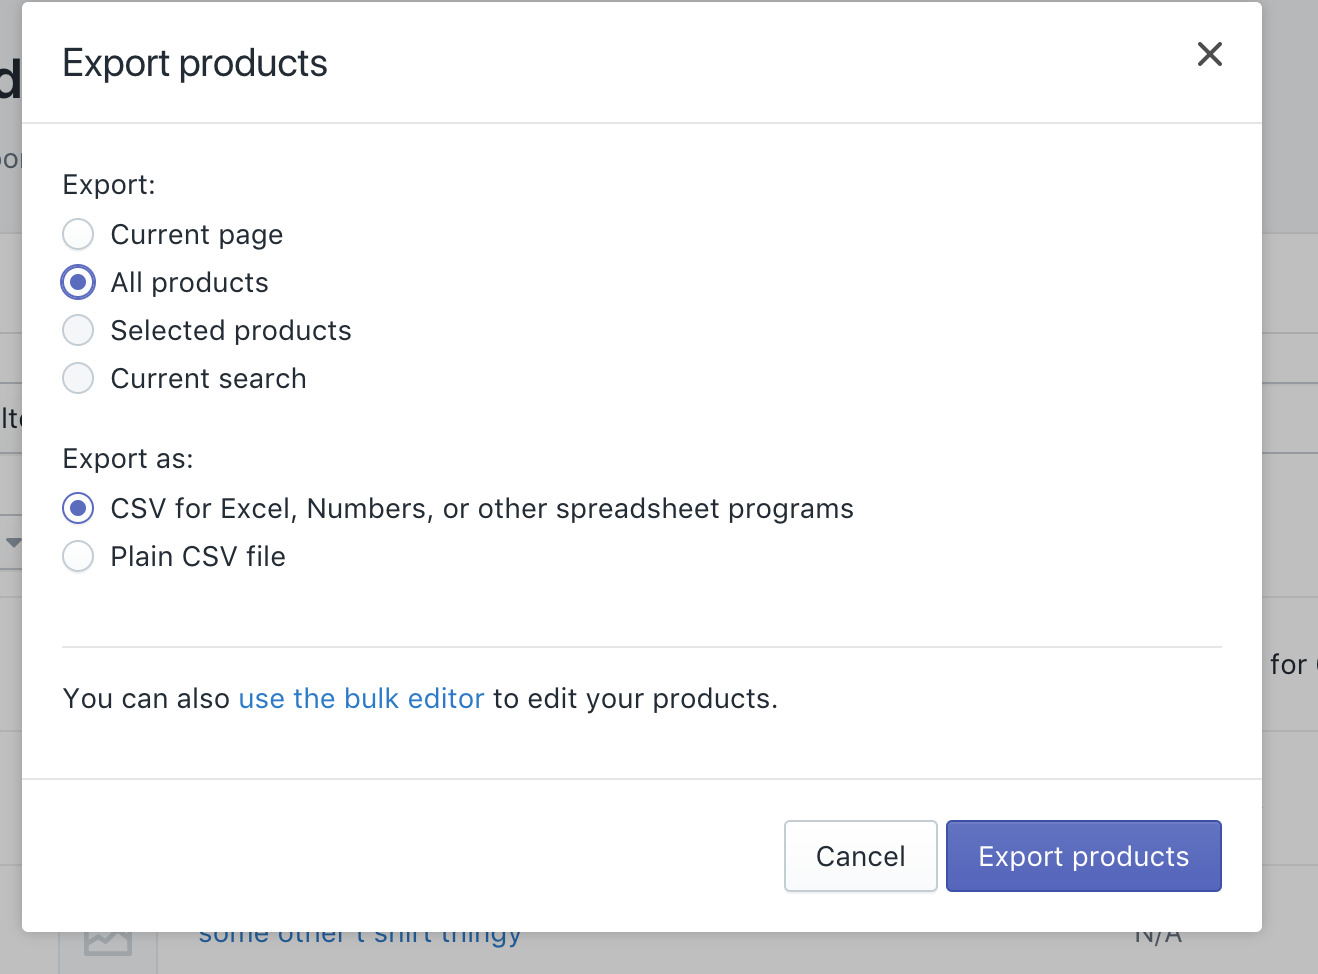 Export the products as a CSV